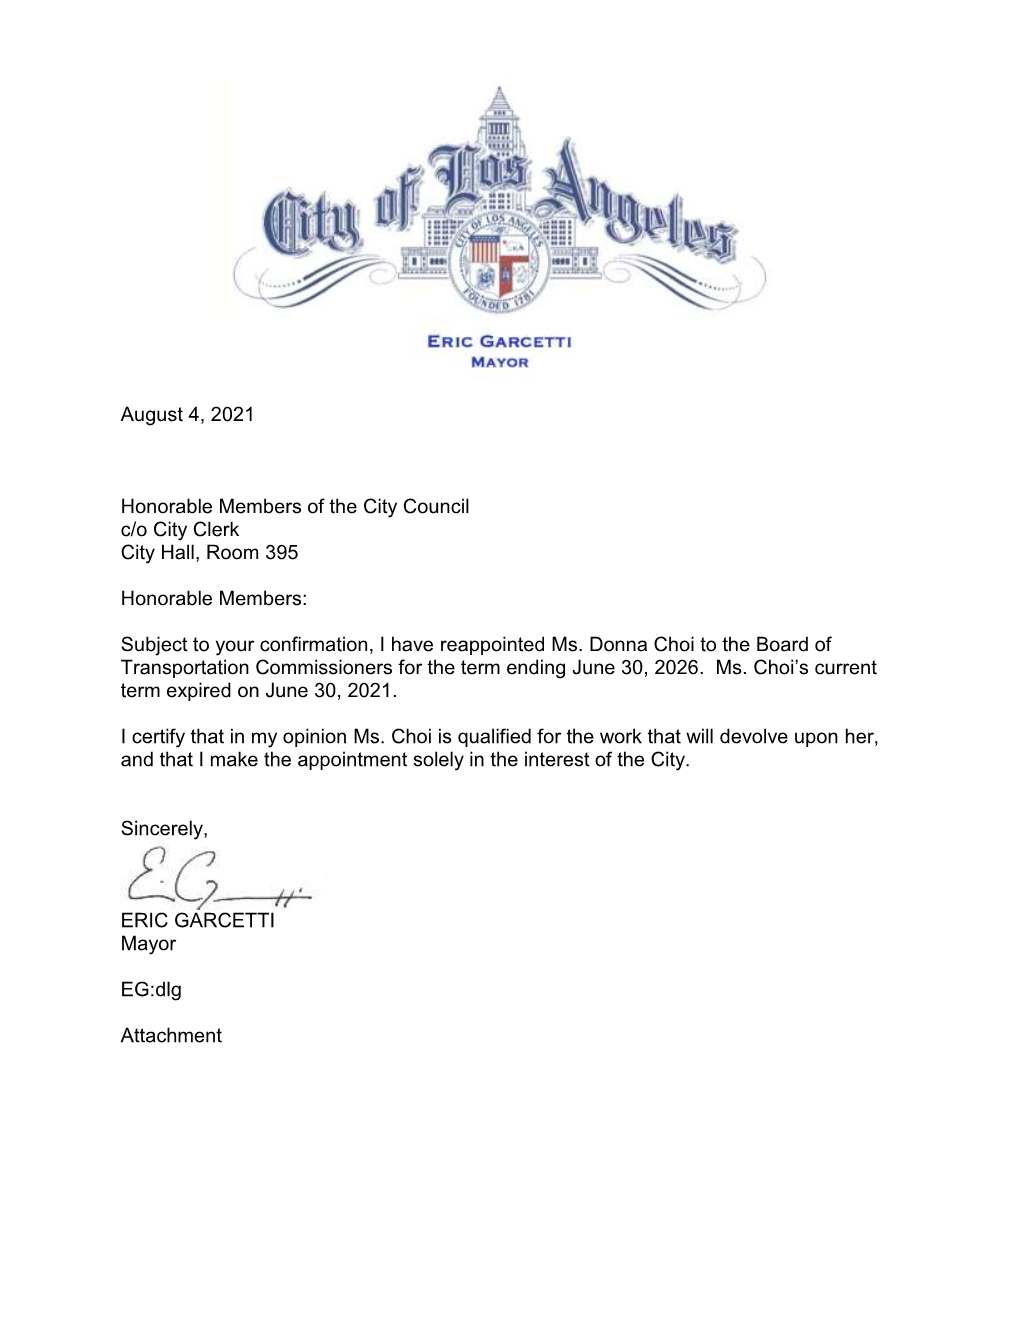 Communication from Mayor Dated 8-04-21